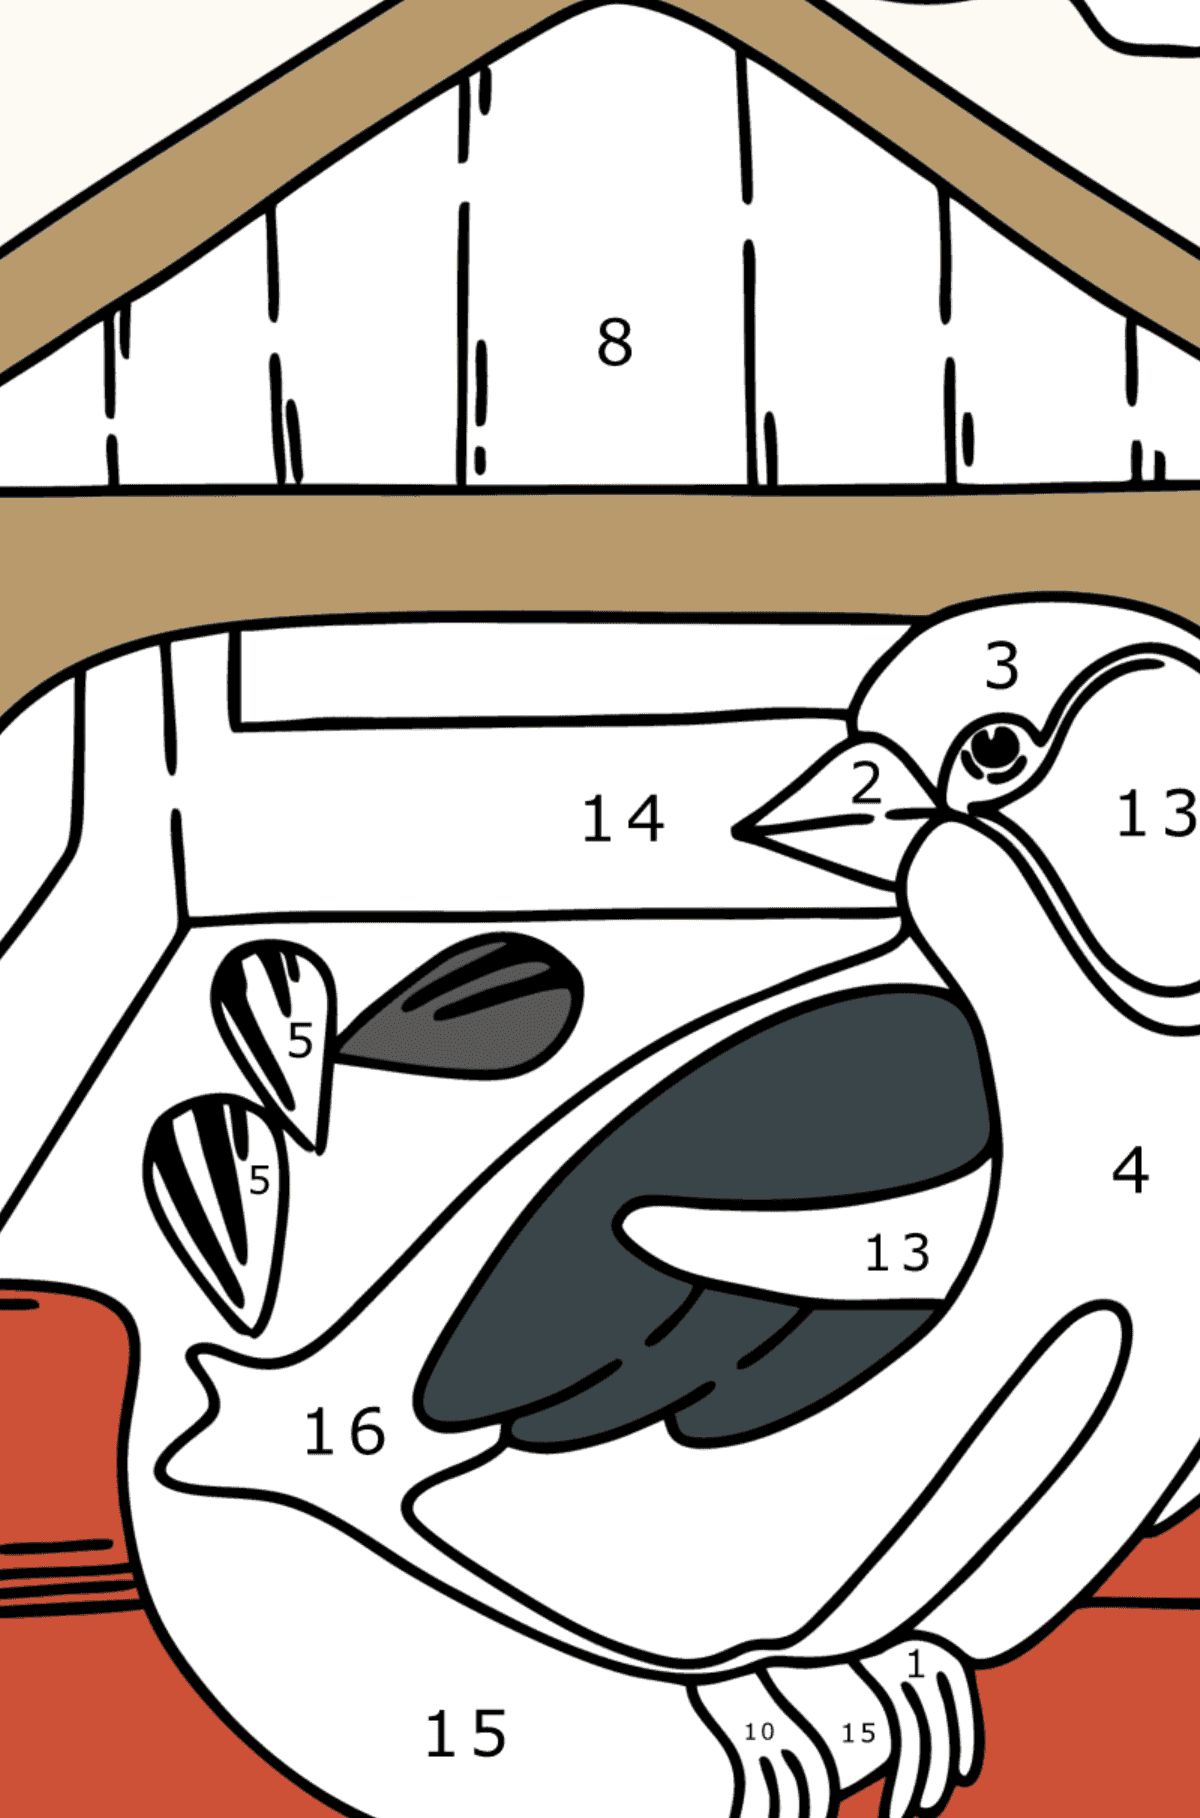 Coloring page - Bird feeder - Coloring by Numbers for Kids